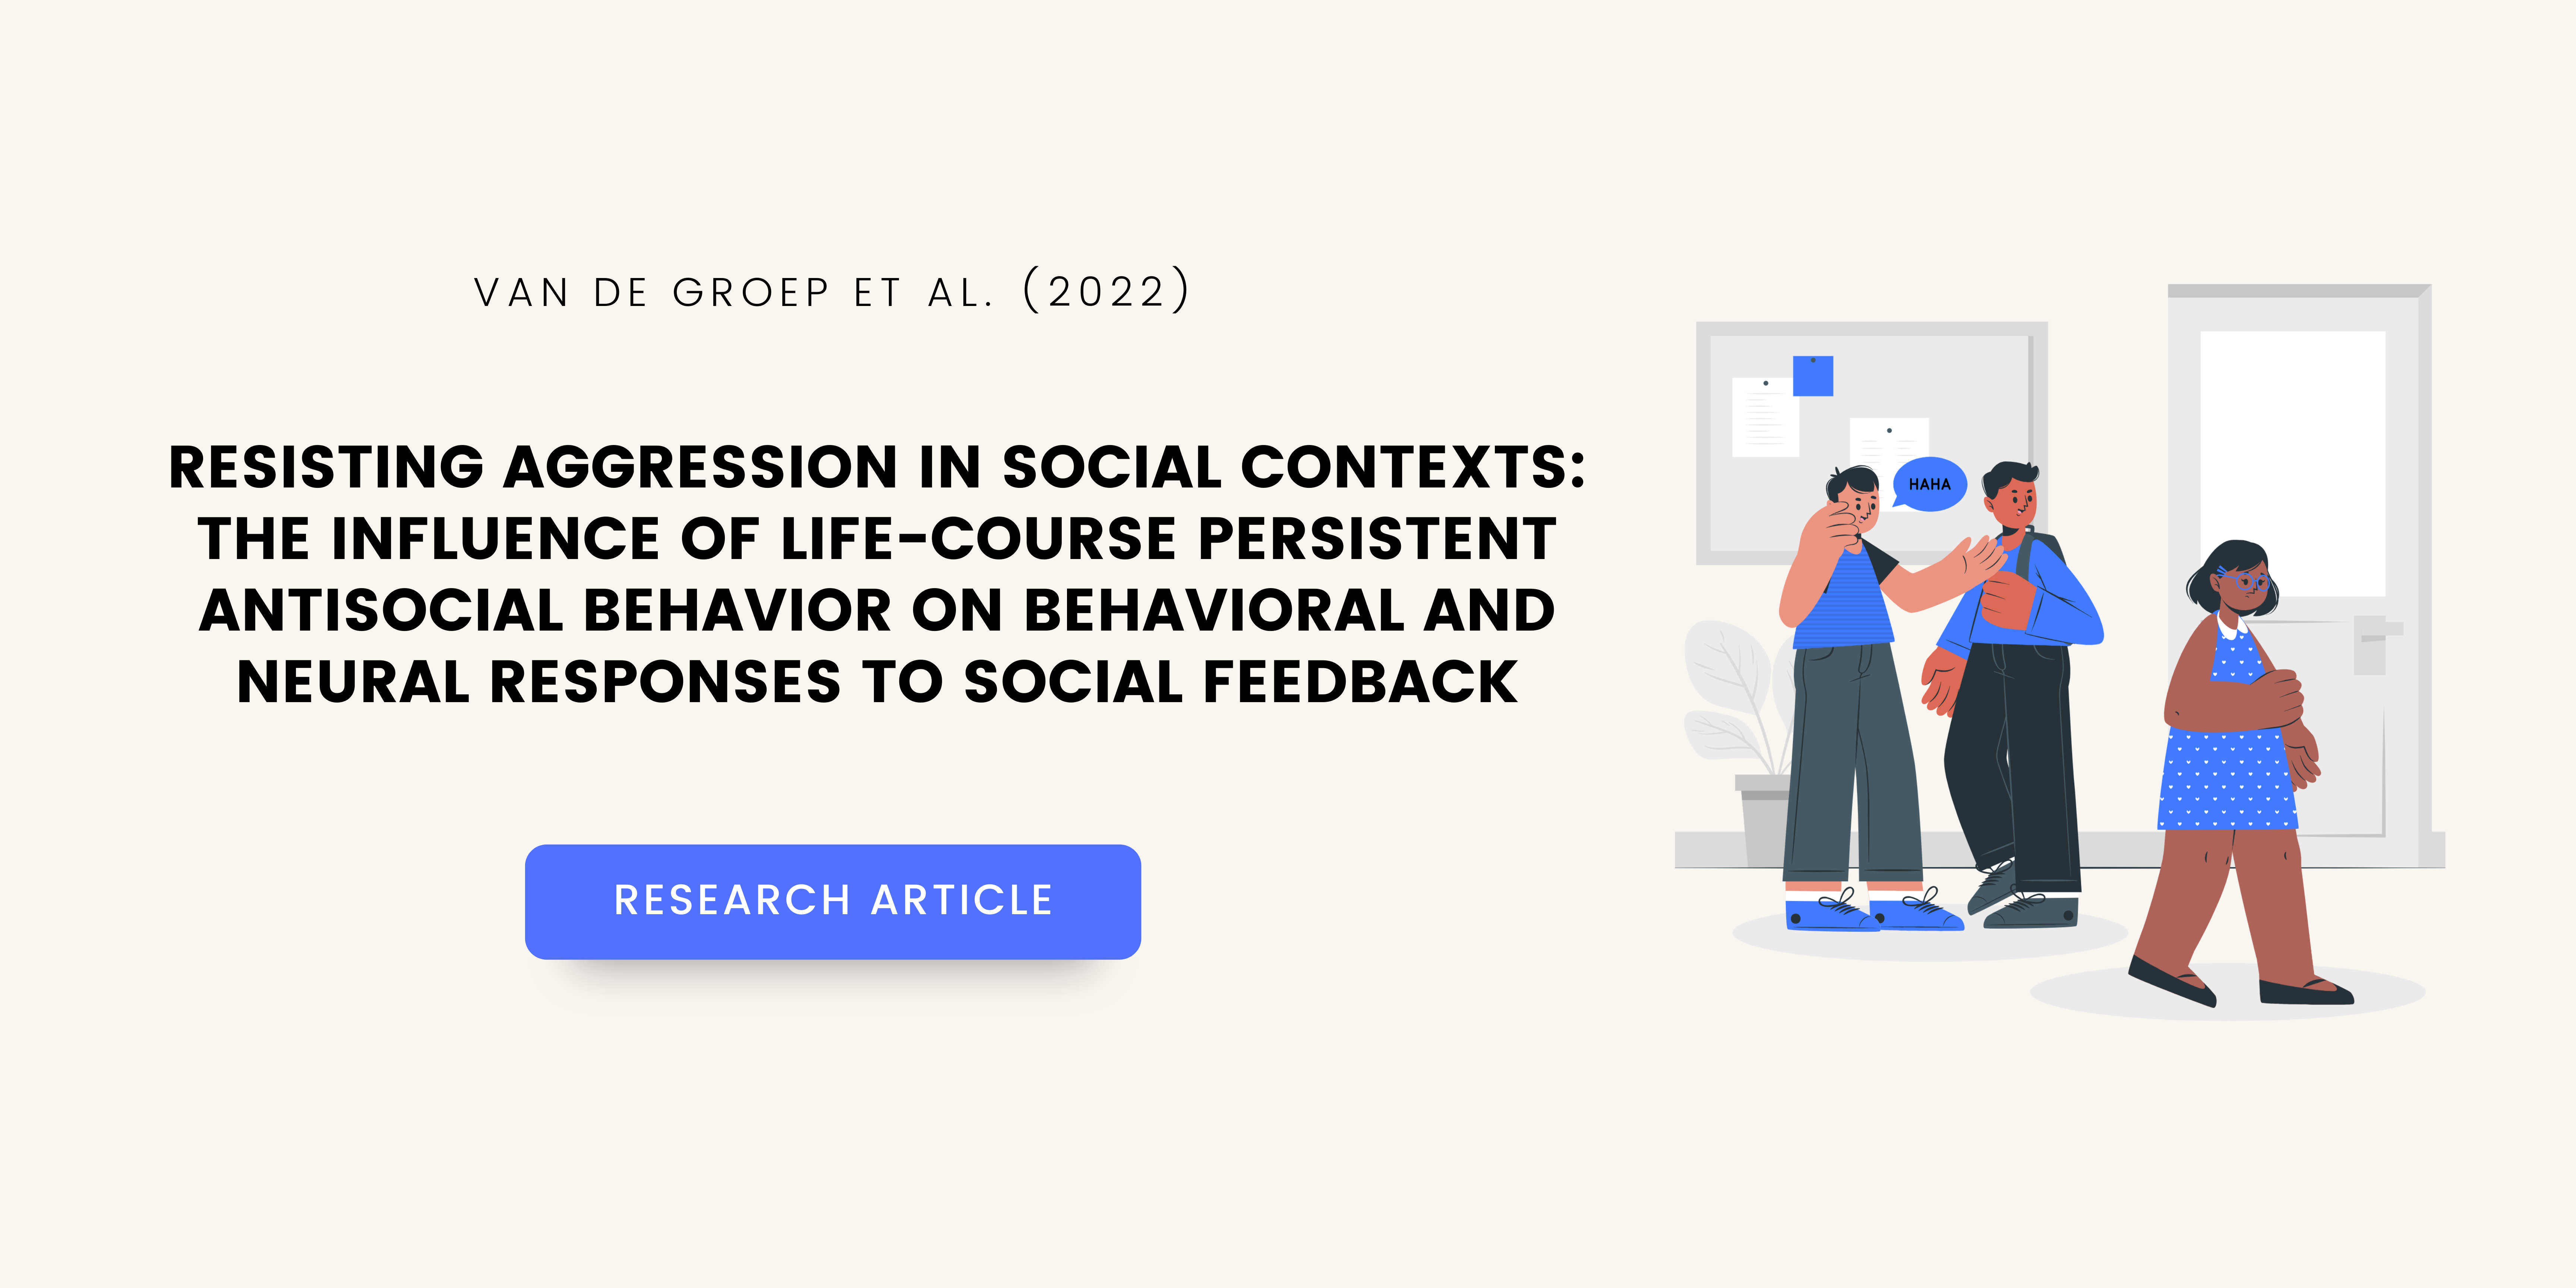 Resisting aggression in social contexts: The influence of life-course persistent antisocial behavior on behavioral and neural responses to social feedback